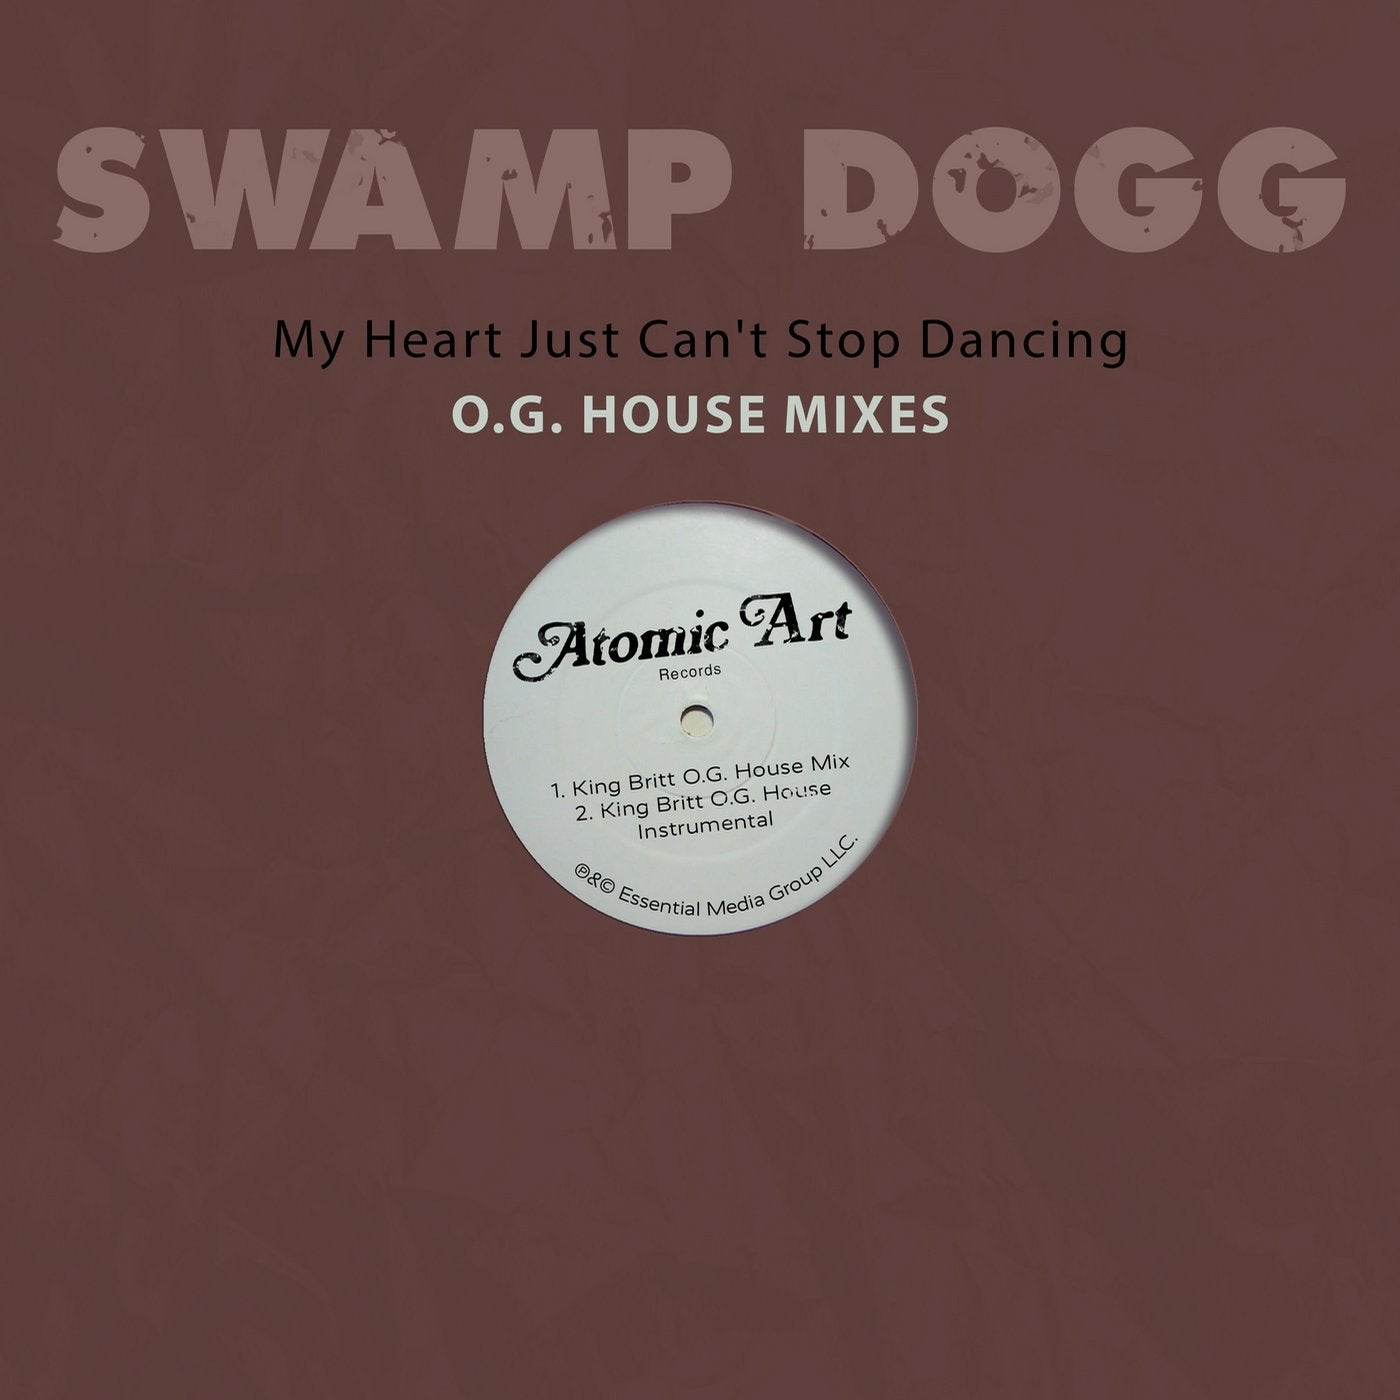 My Heart Just Can't Stop Dancing - O.G. House Mixes